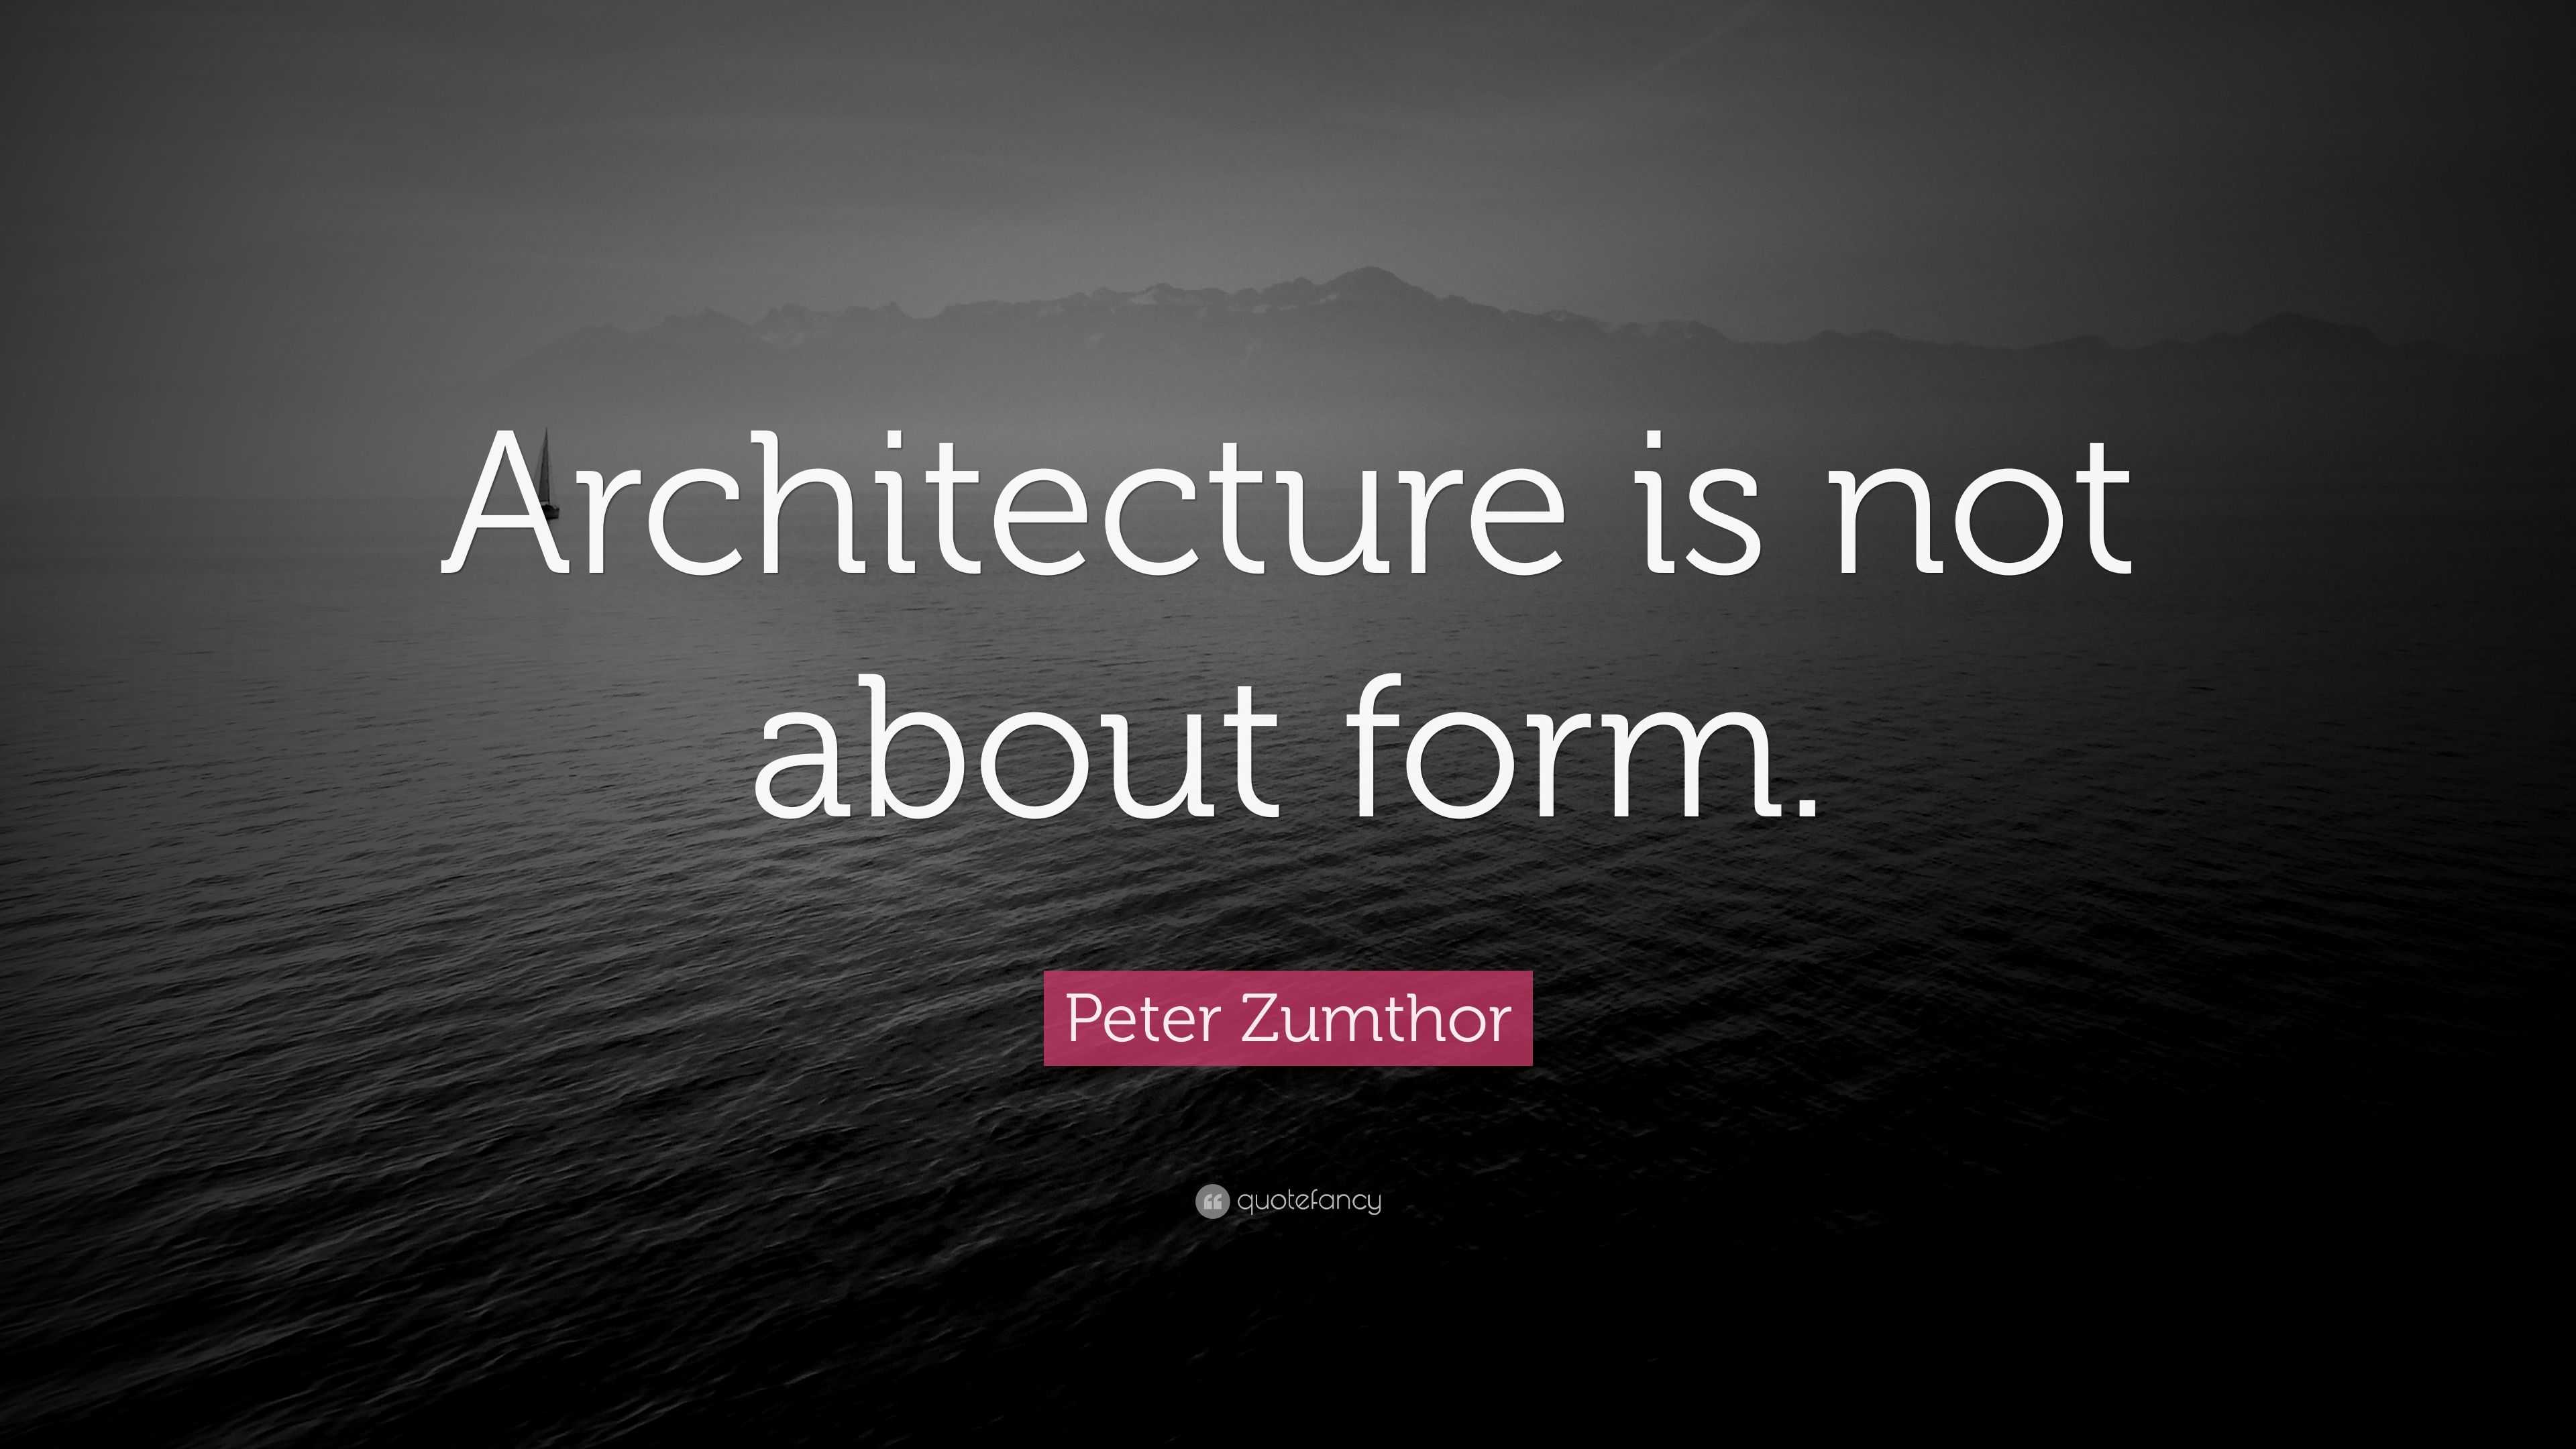 Peter Zumthor Quote: “Architecture is not about form.”